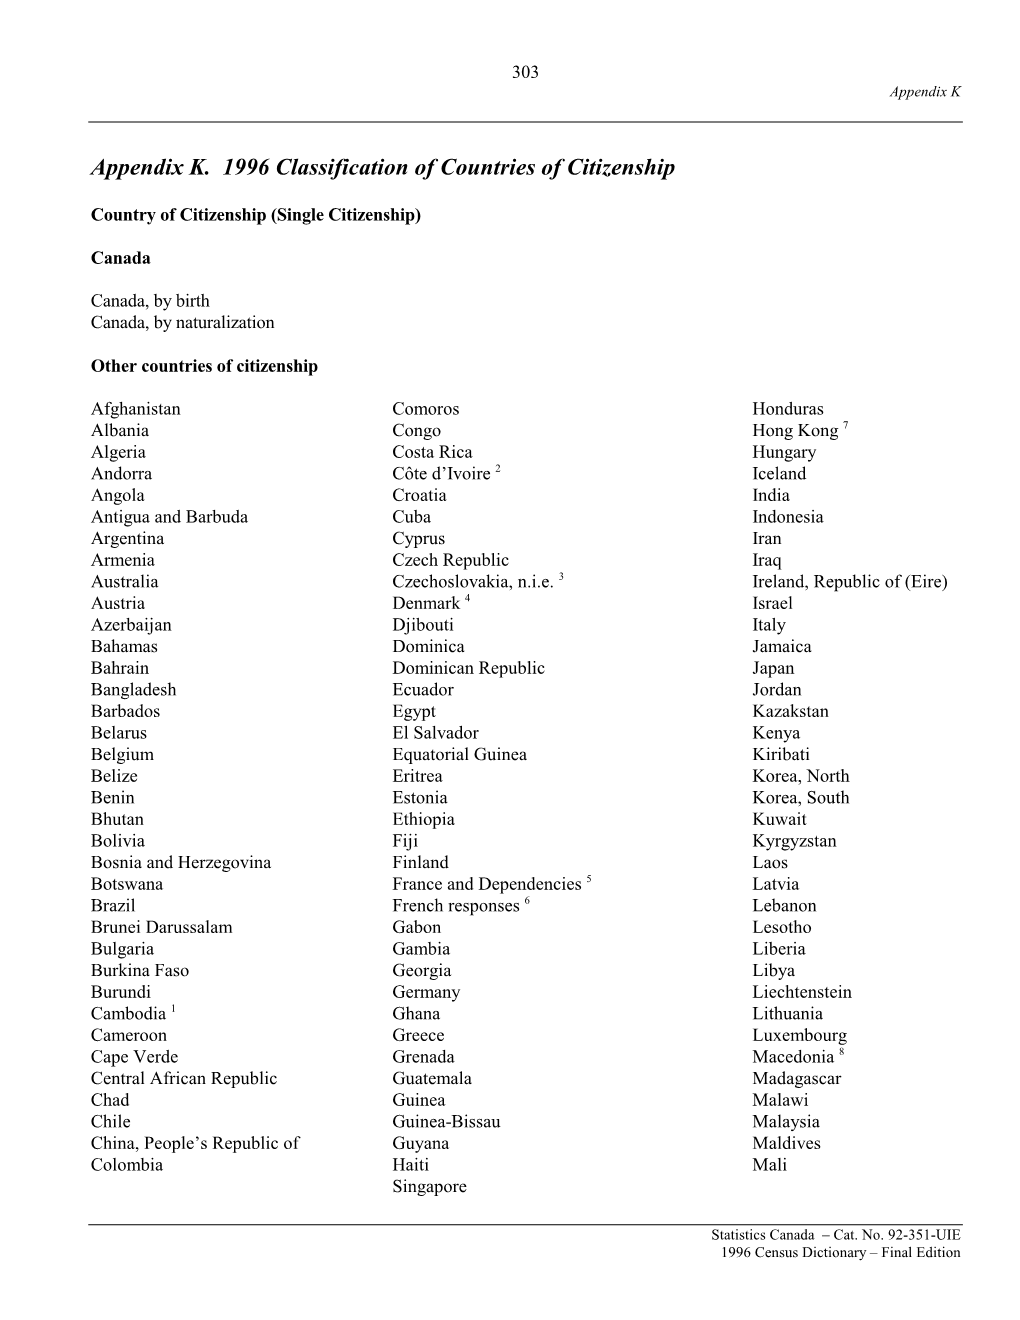 Appendix K. 1996 Classification of Countries of Citizenship